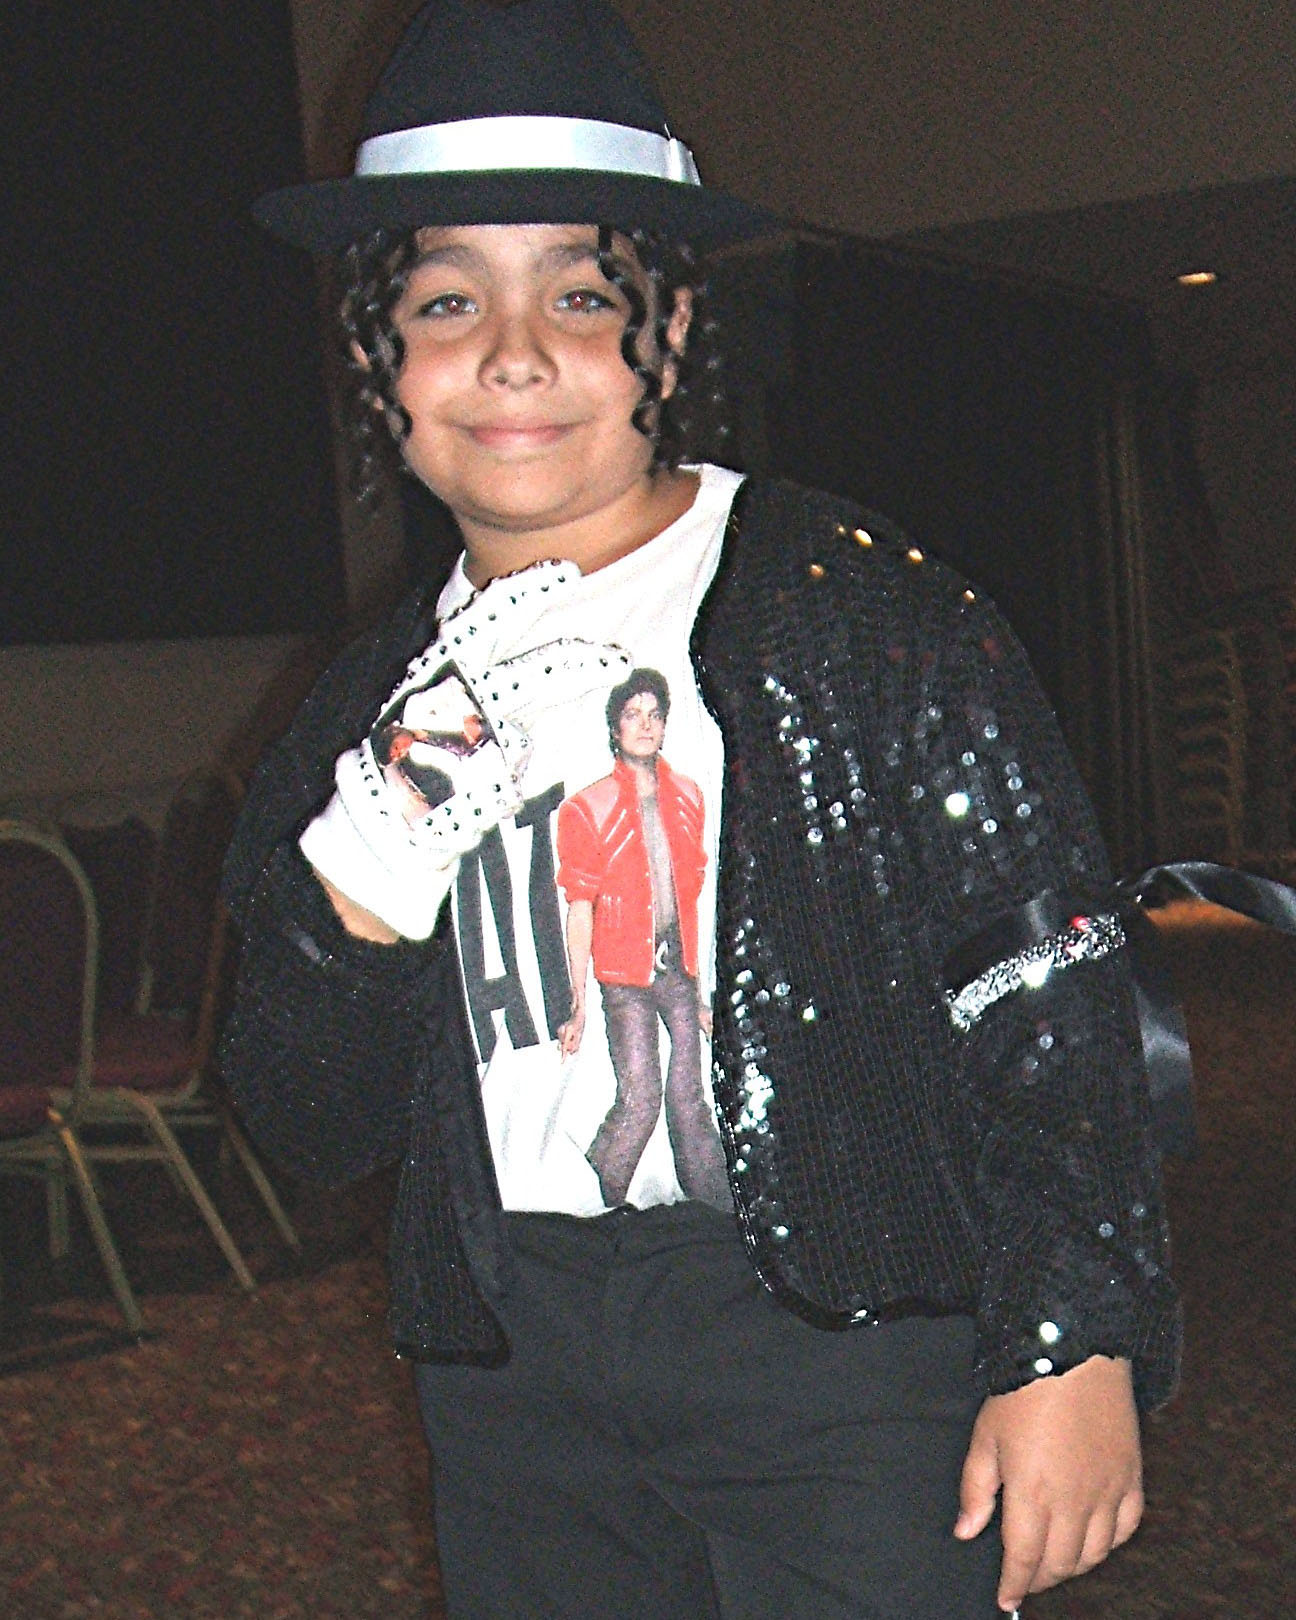 Nine-year-old Jackson impersonator is relevant for Vegas show fans at Stratosphere